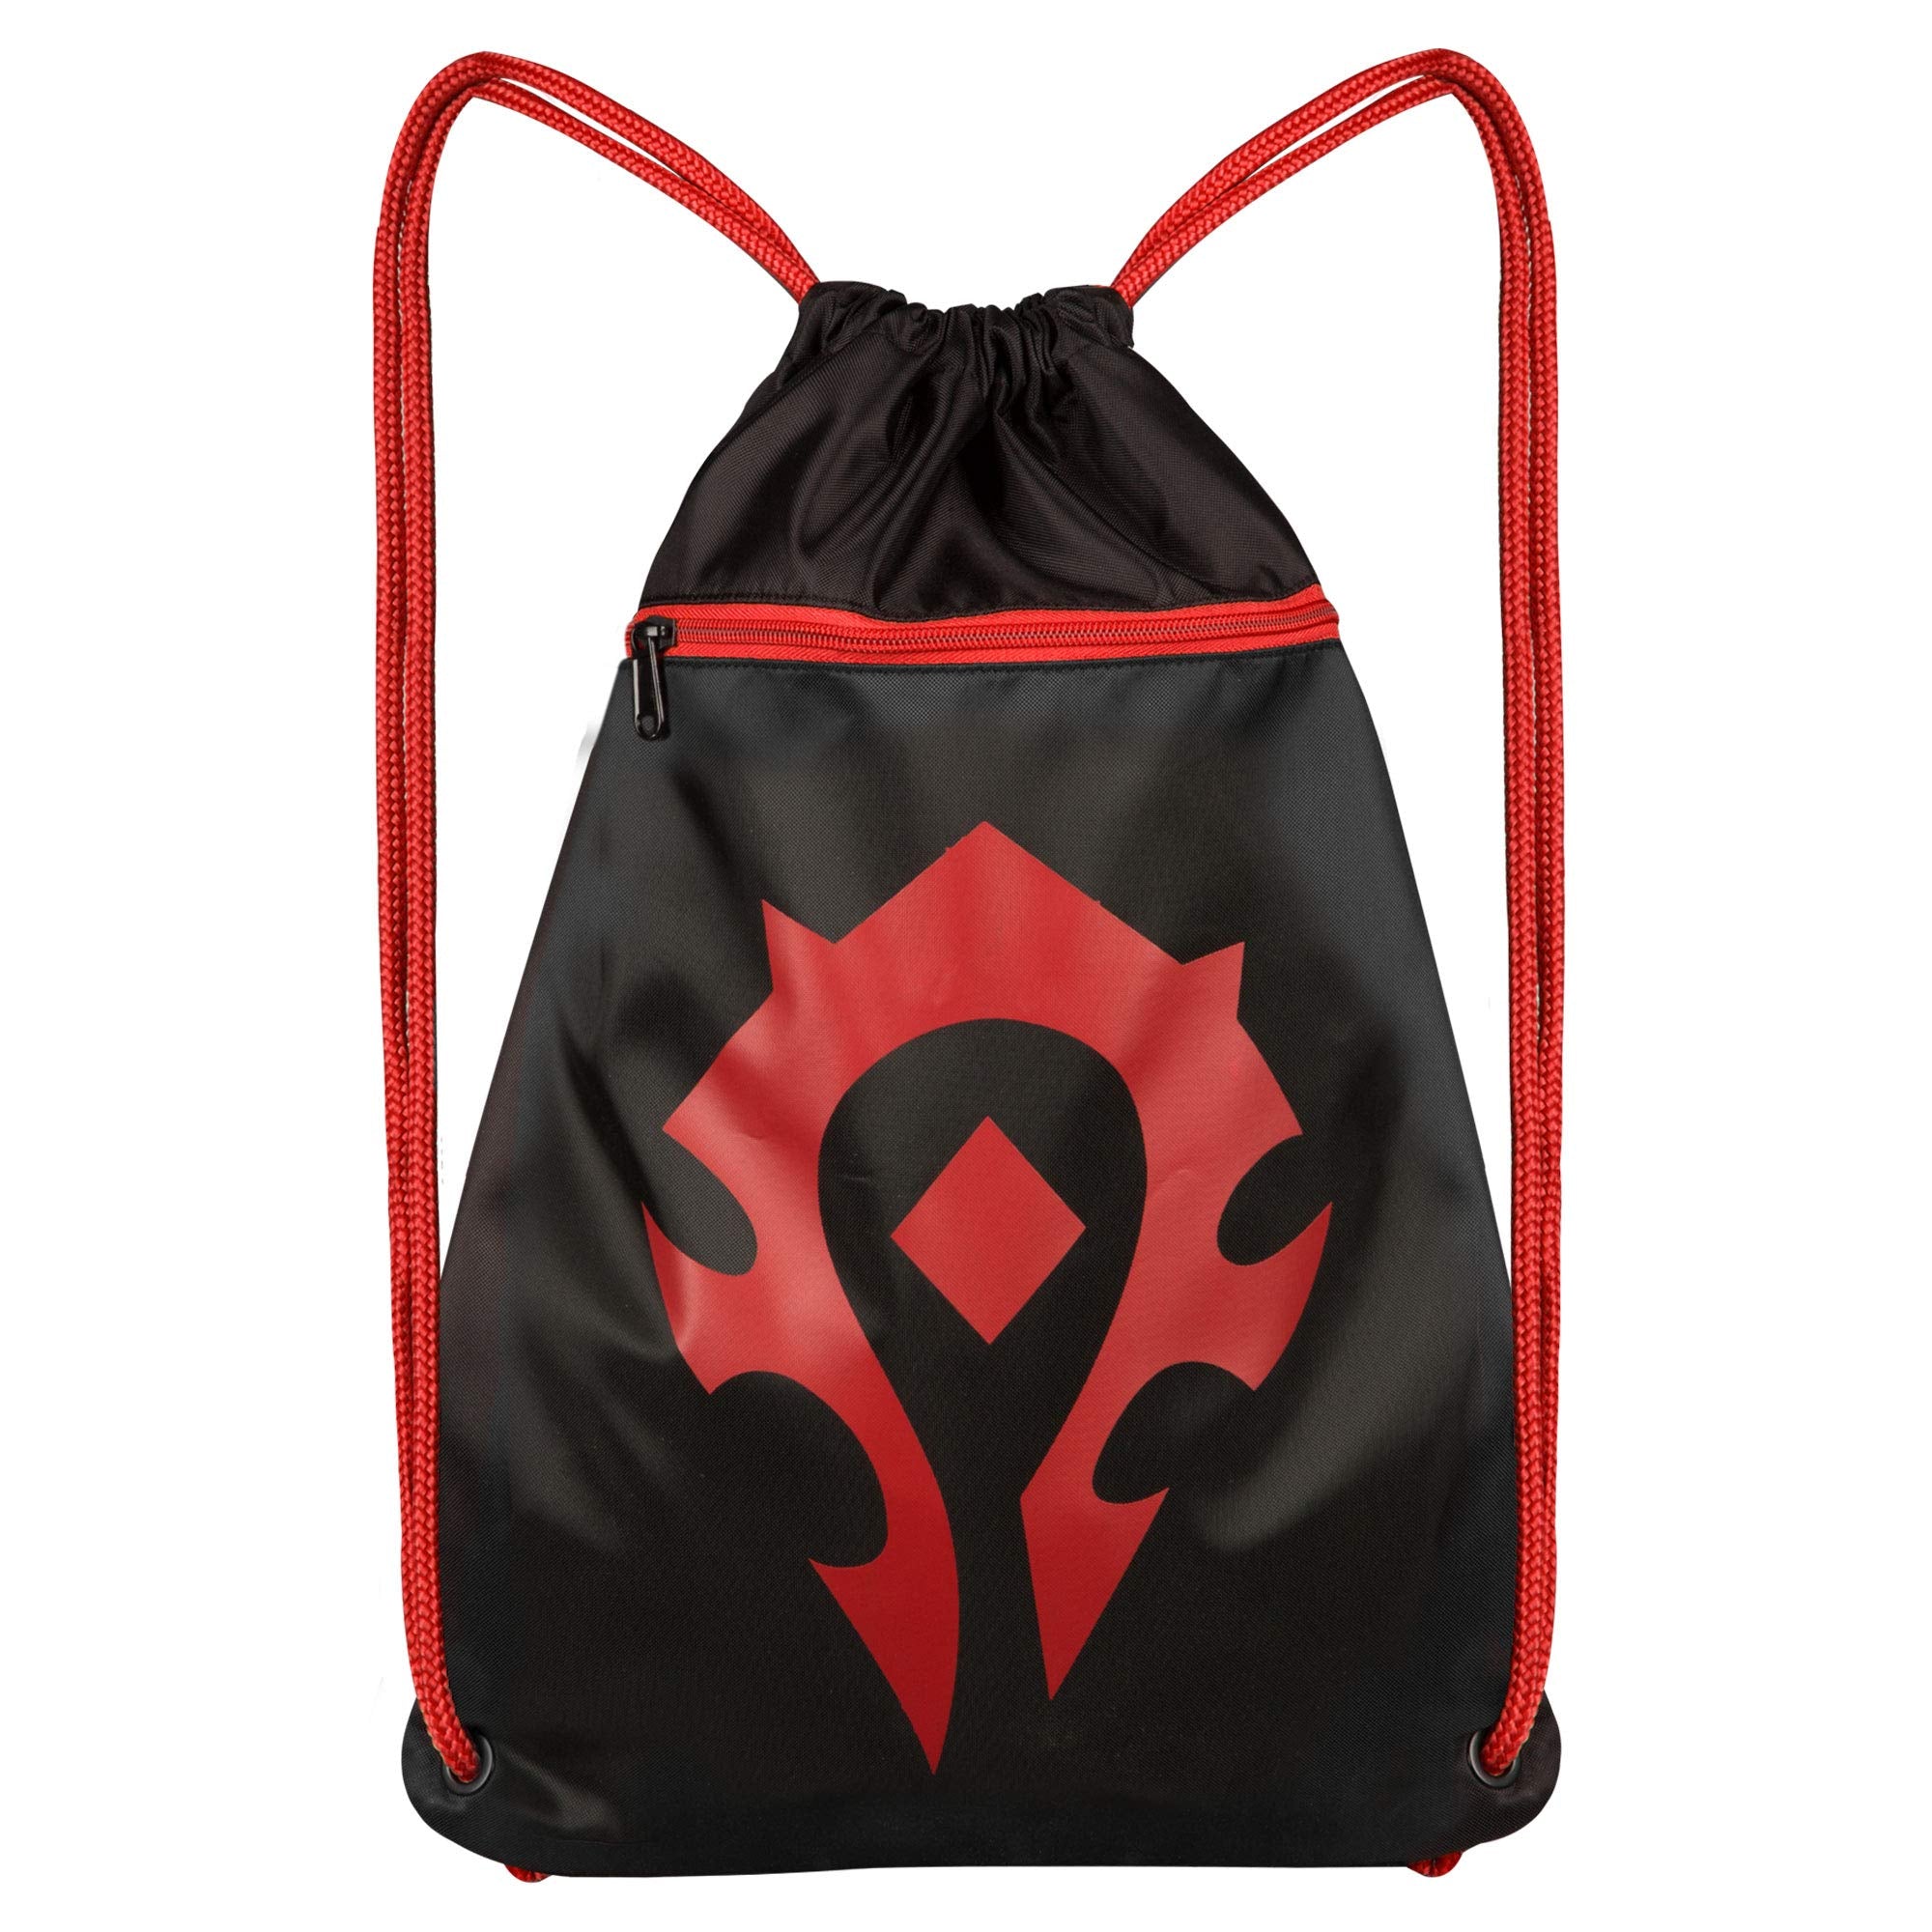 World of Warcraft Horde Logo Drawstring Backpack by JINX - 19" Loot Bag for Gaming Gear Travel & Outdoors